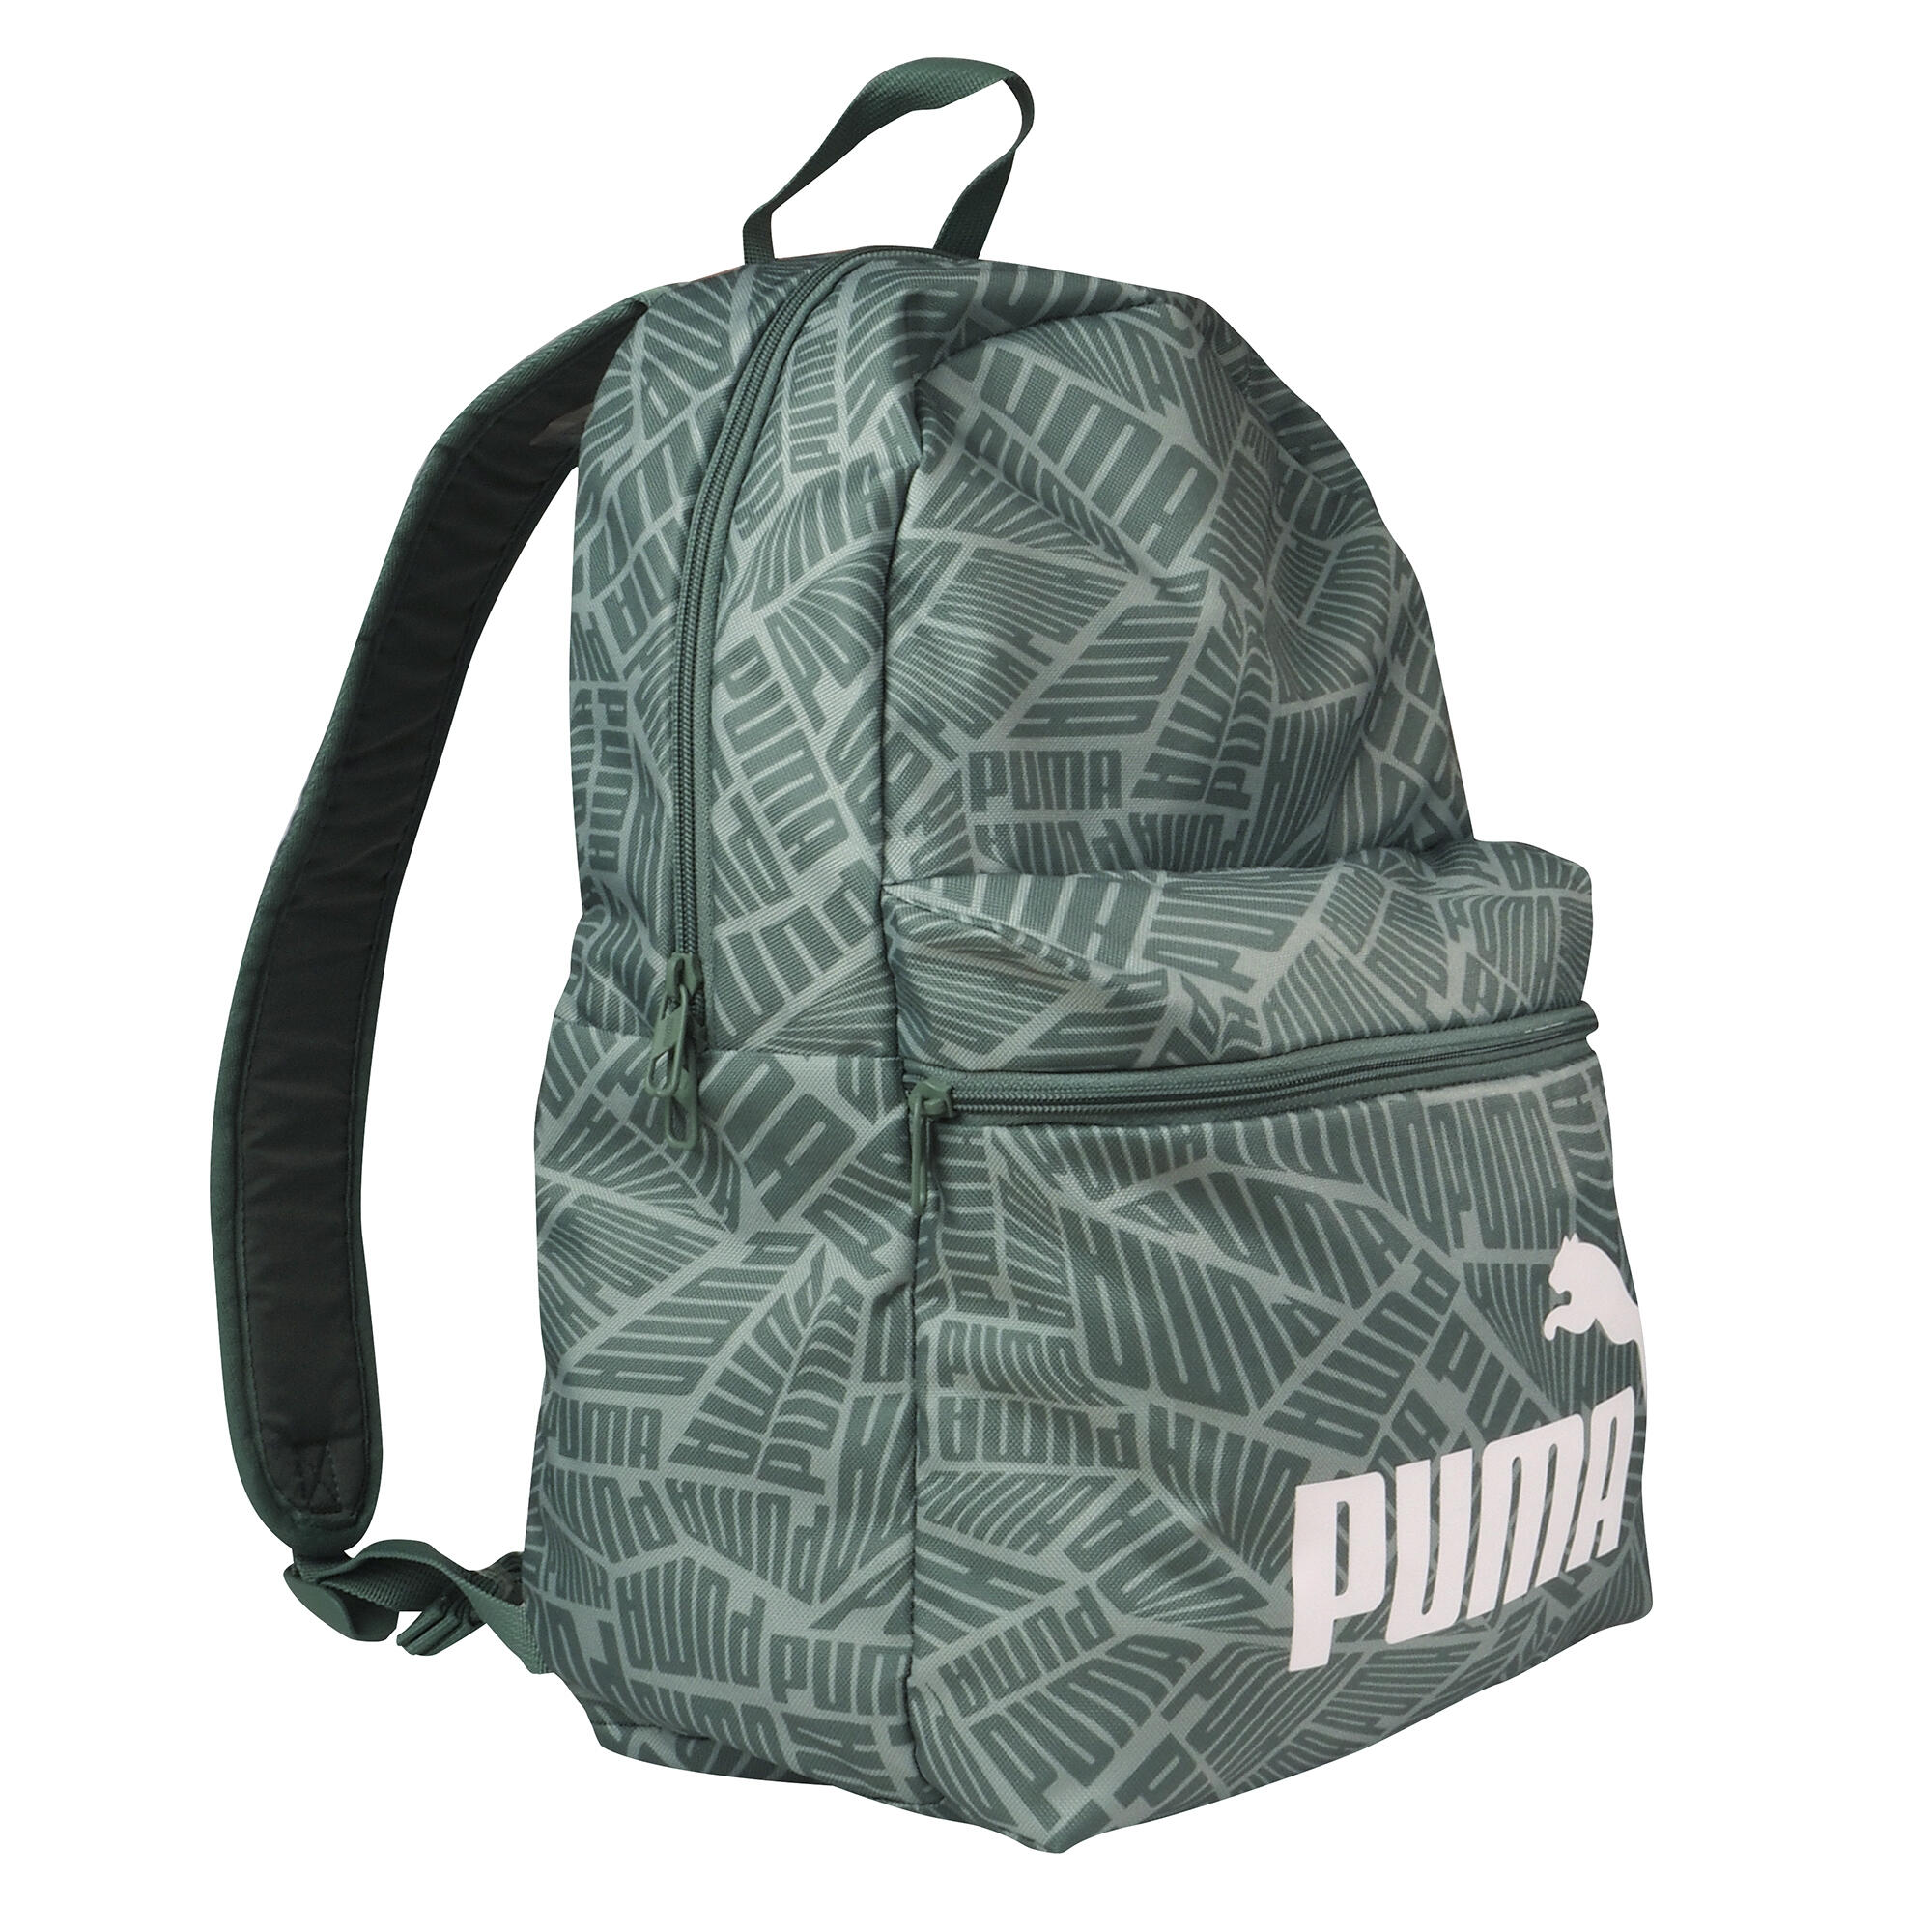 Backpack Phase - Green 1/7